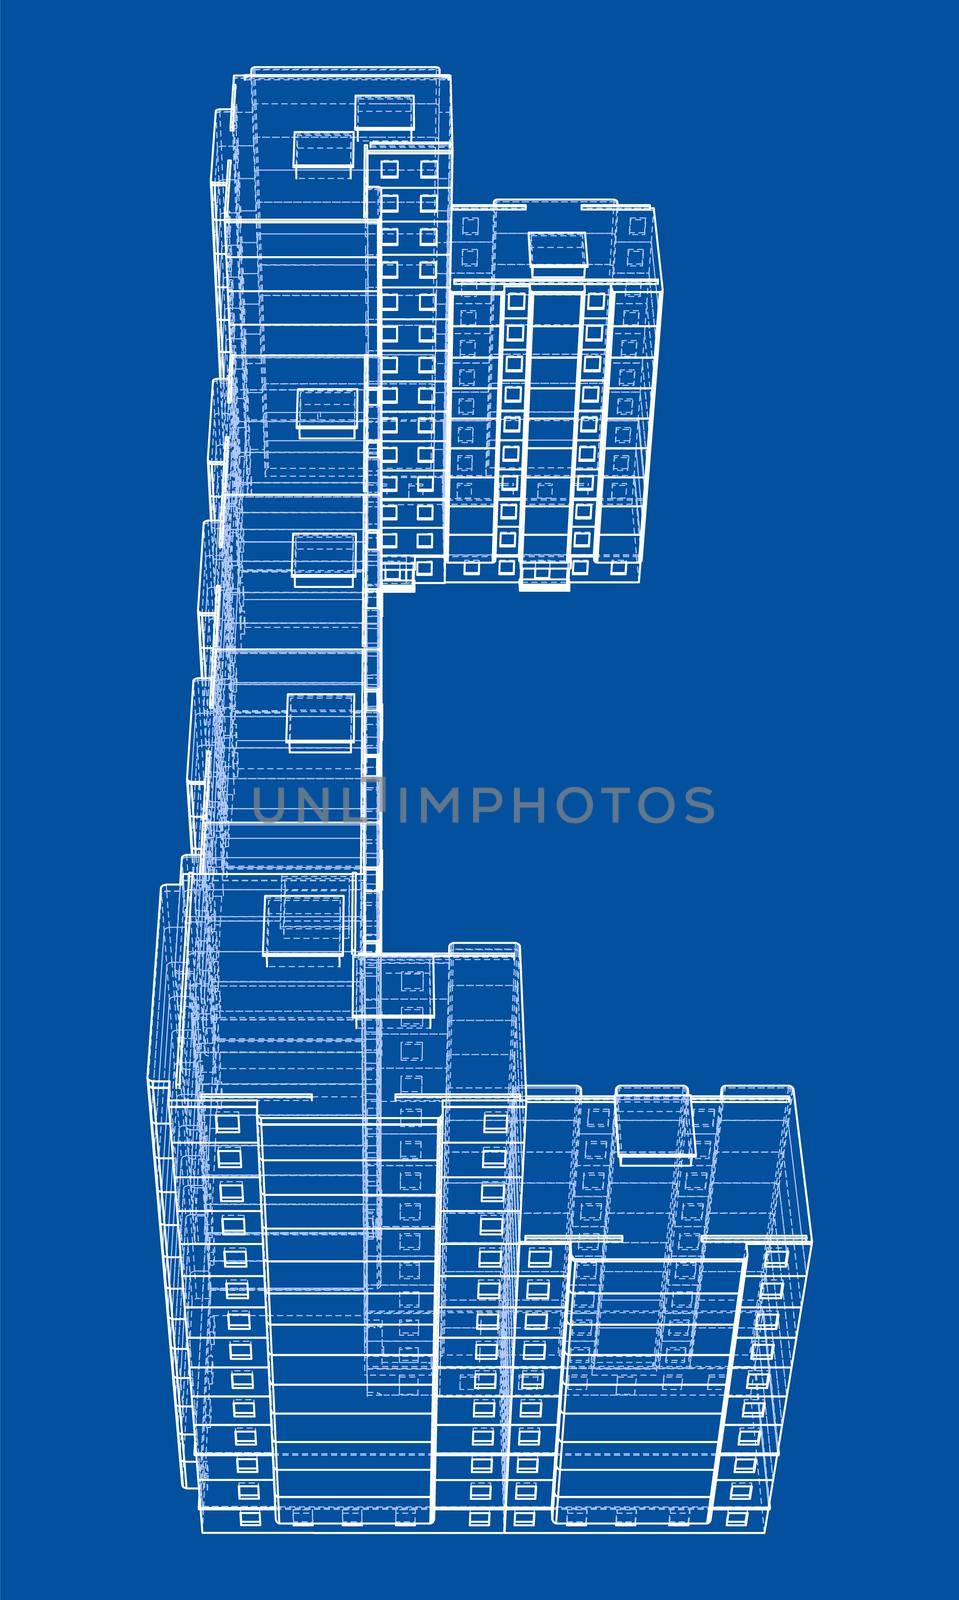 Multi-storey residential building. Construction concept. Drawing or blueprint style. 3d illustration